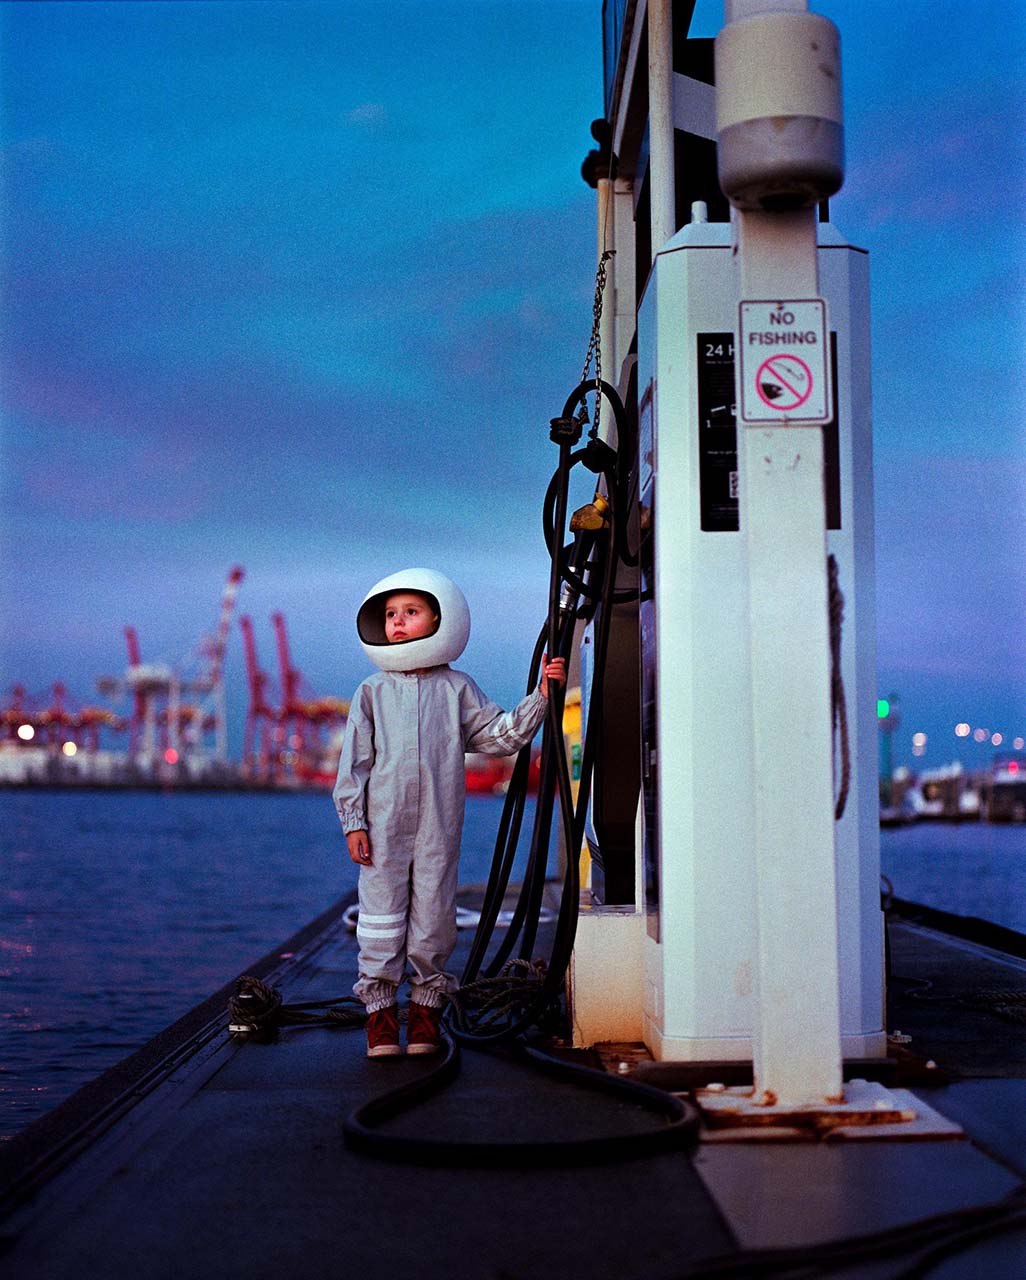 A young girl wearing a spacesuit costume and helmet stands next to a bayside fuel bowser with cranes behind her